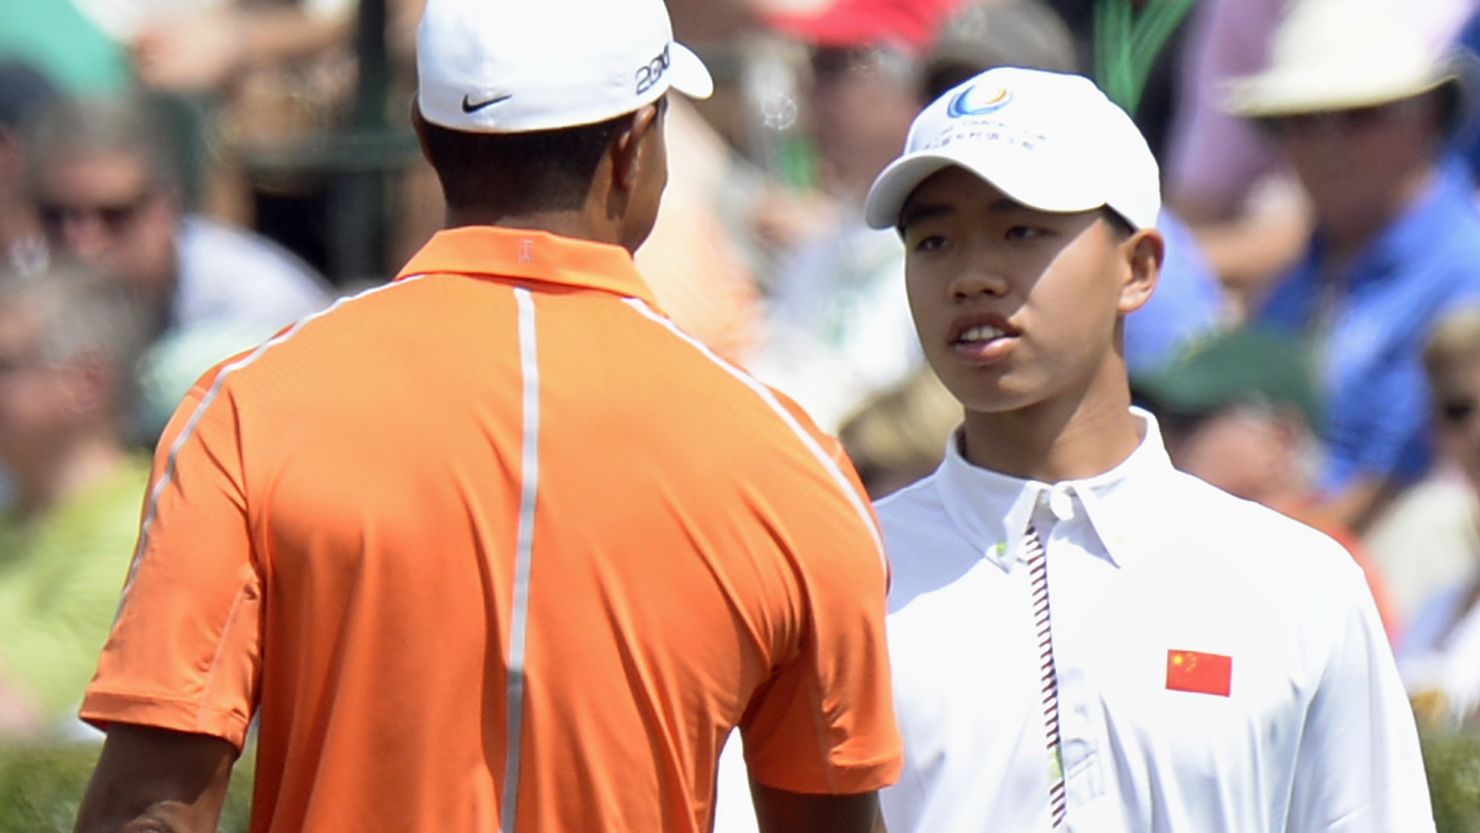 Guan Tianlang (right) will become the youngest player to ever compete in the Masters.